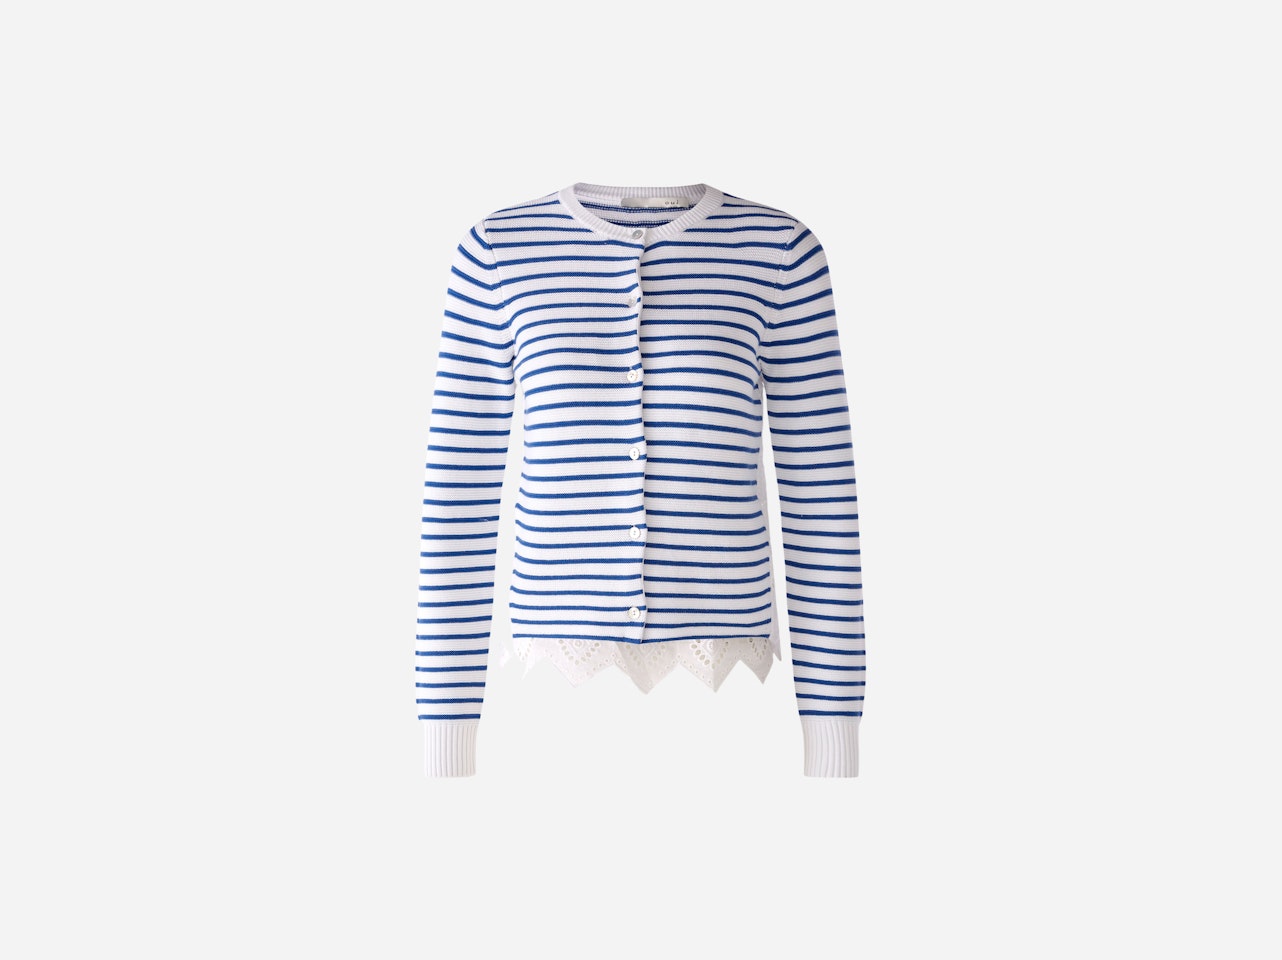 Bild 1 von Cardigan patched in pure cotton in offwhite blue | Oui